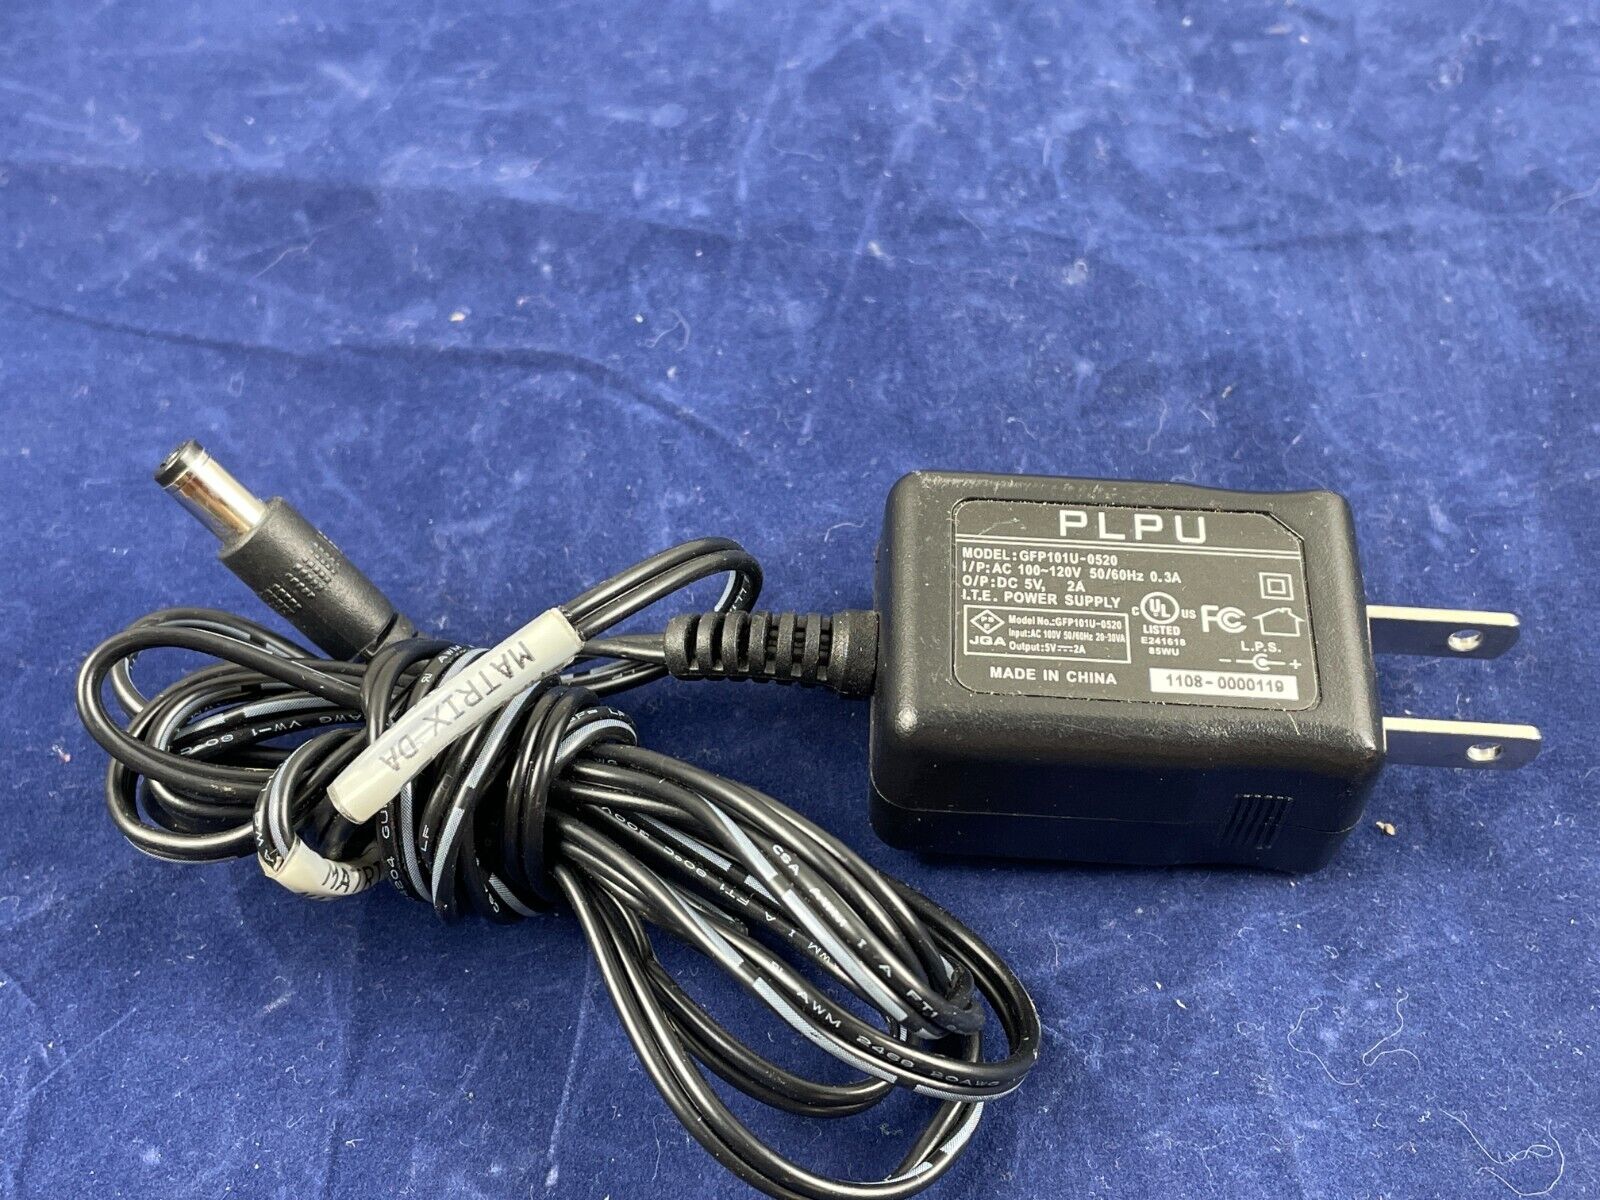 PLPU AC/DC Adapter For GFP101U-1210 Switching Power Adapter Type AC/DC Adapter Features Powered Brand PLPU Brand: PLP